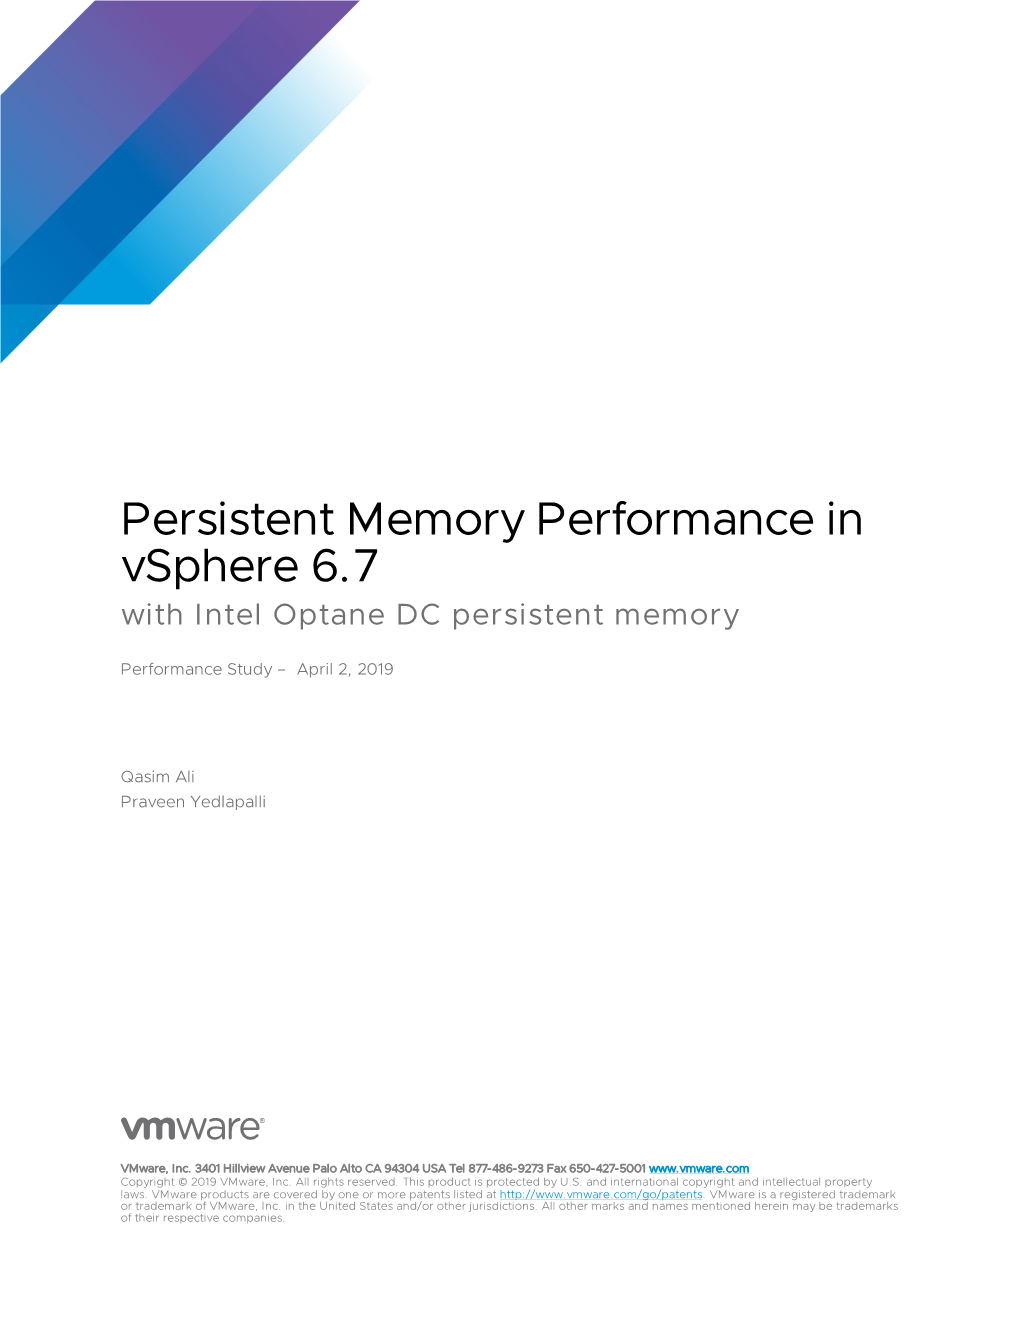 PMEM Performance in Vsphere 6.7 with Intel Optane DC Persistent